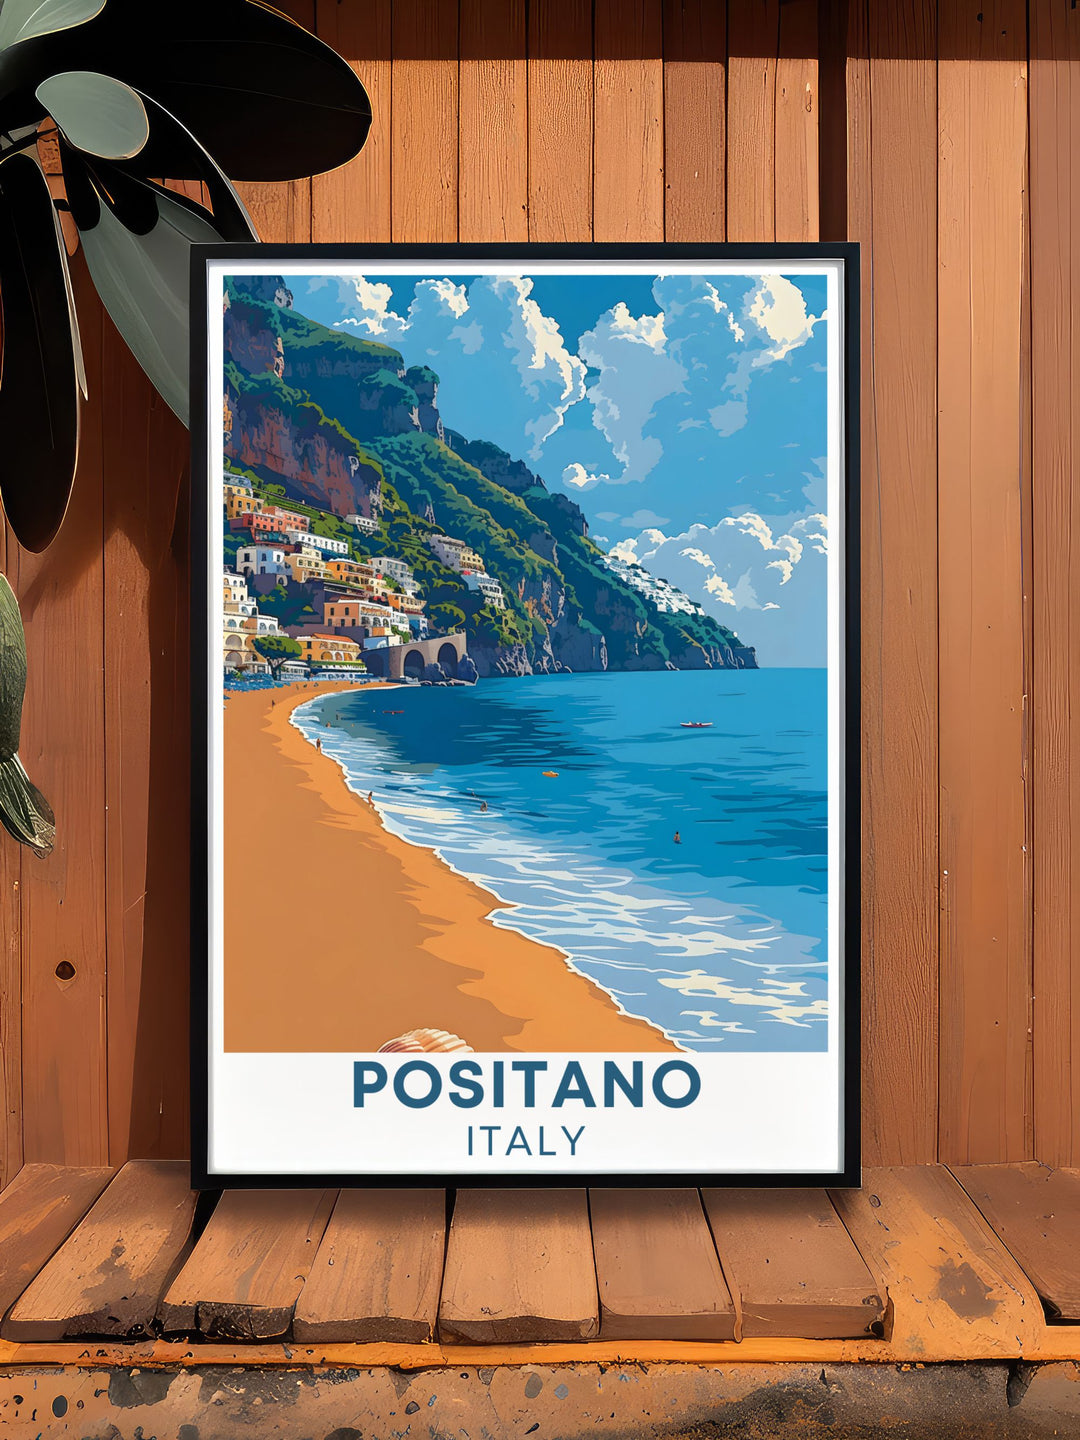 Positano print featuring the stunning Spiaggia Grande beach scene ideal for wall decor that exudes the charm of the Amalfi Coast and adds a serene and artistic touch to any room in your home with Italian cultural highlights